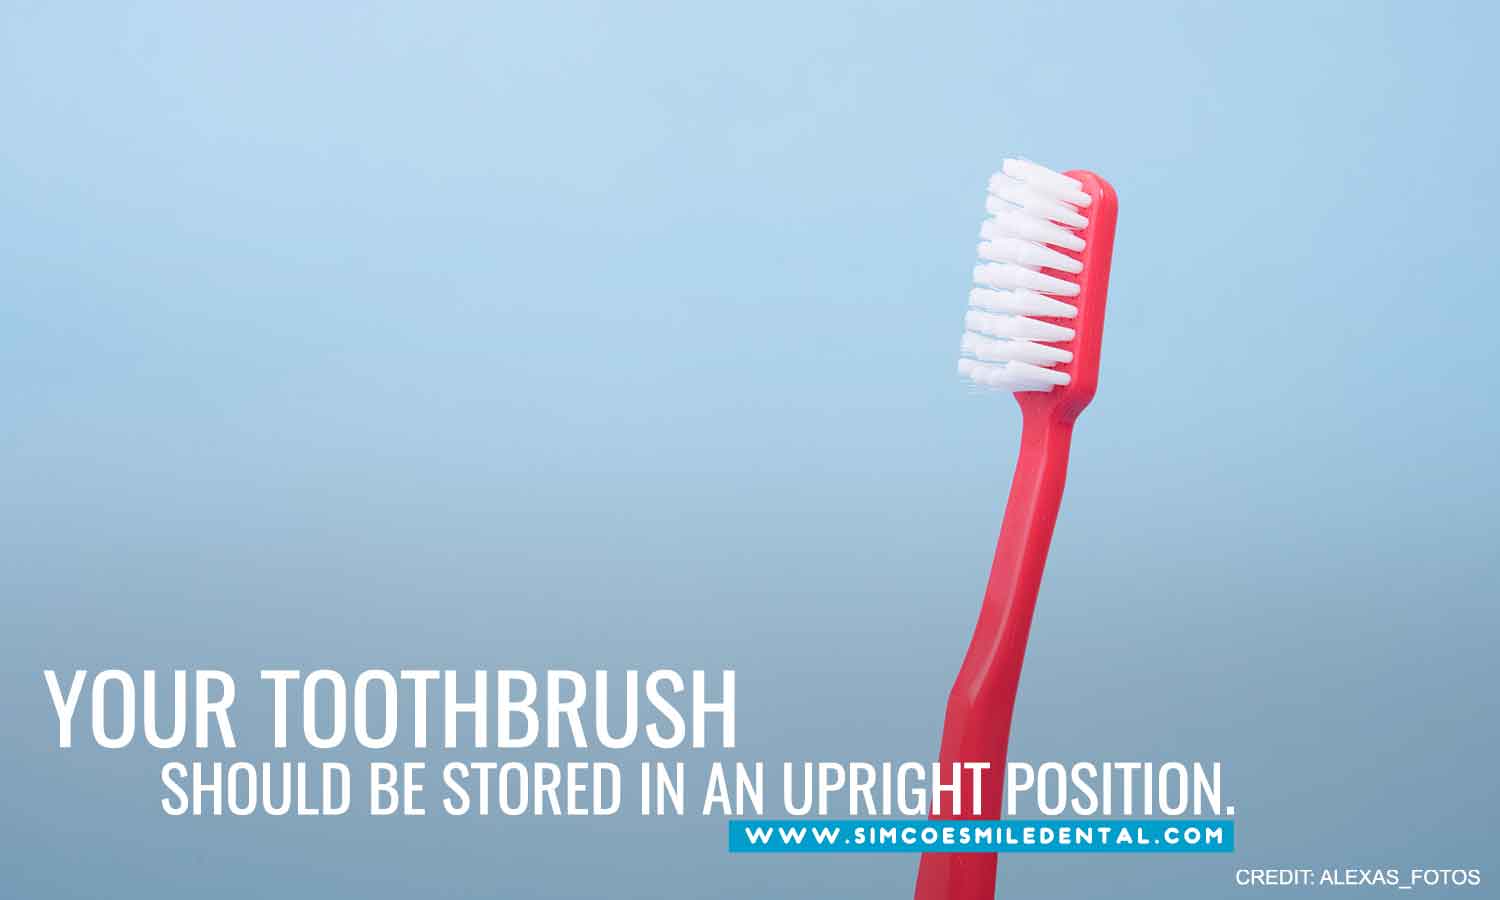 How to Help Your Toothbrush Take Care of Your Teeth